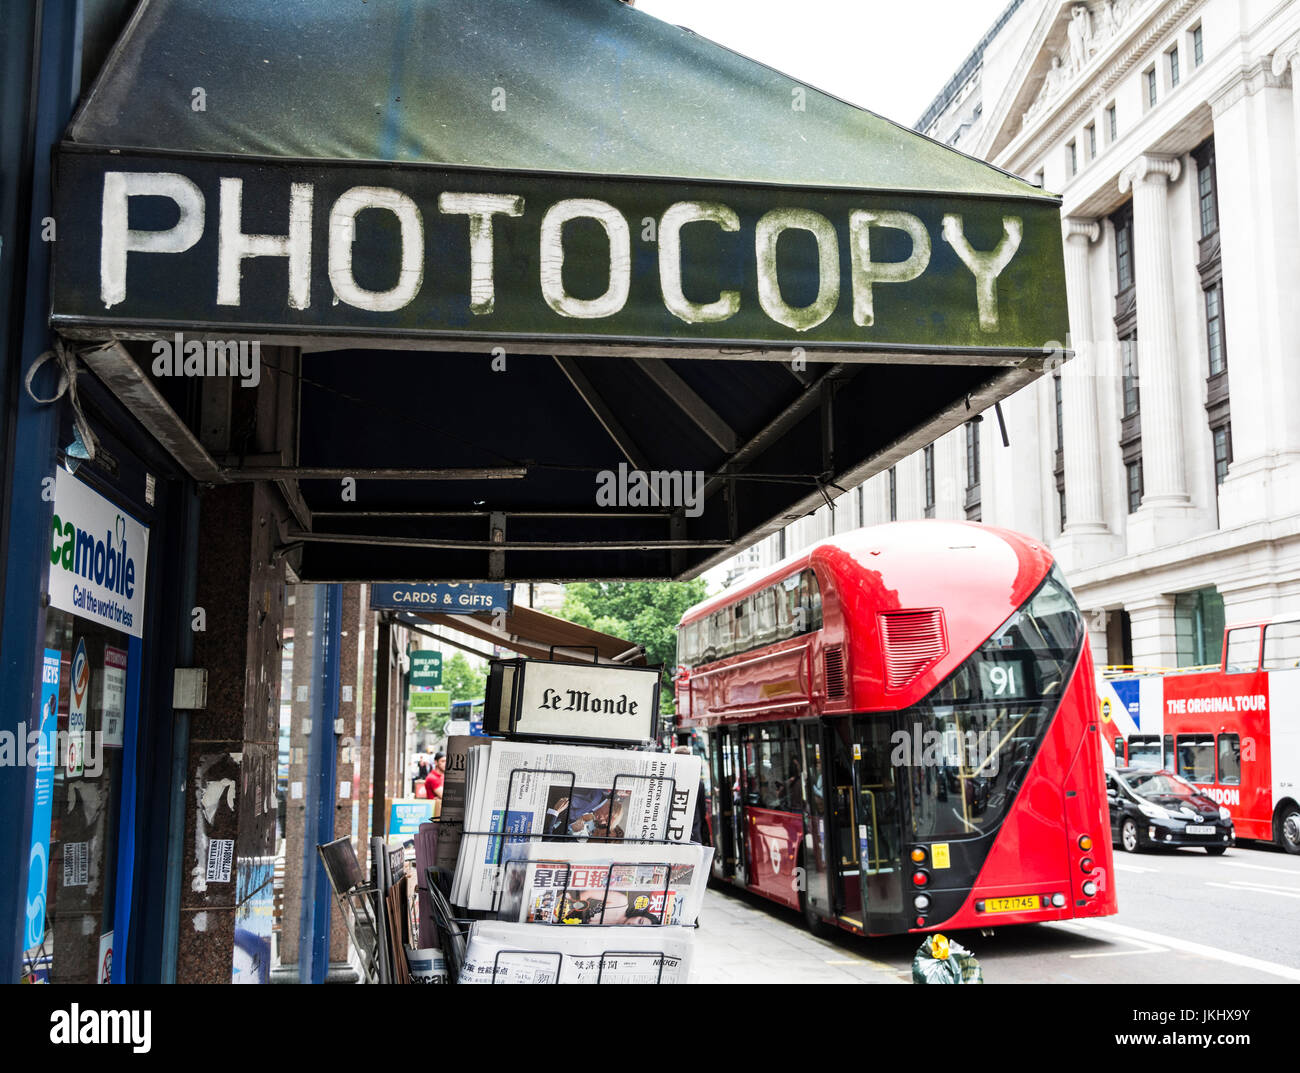 Exterior of a newsagents with a large 'Photocopy' awning over the main entrance Stock Photo